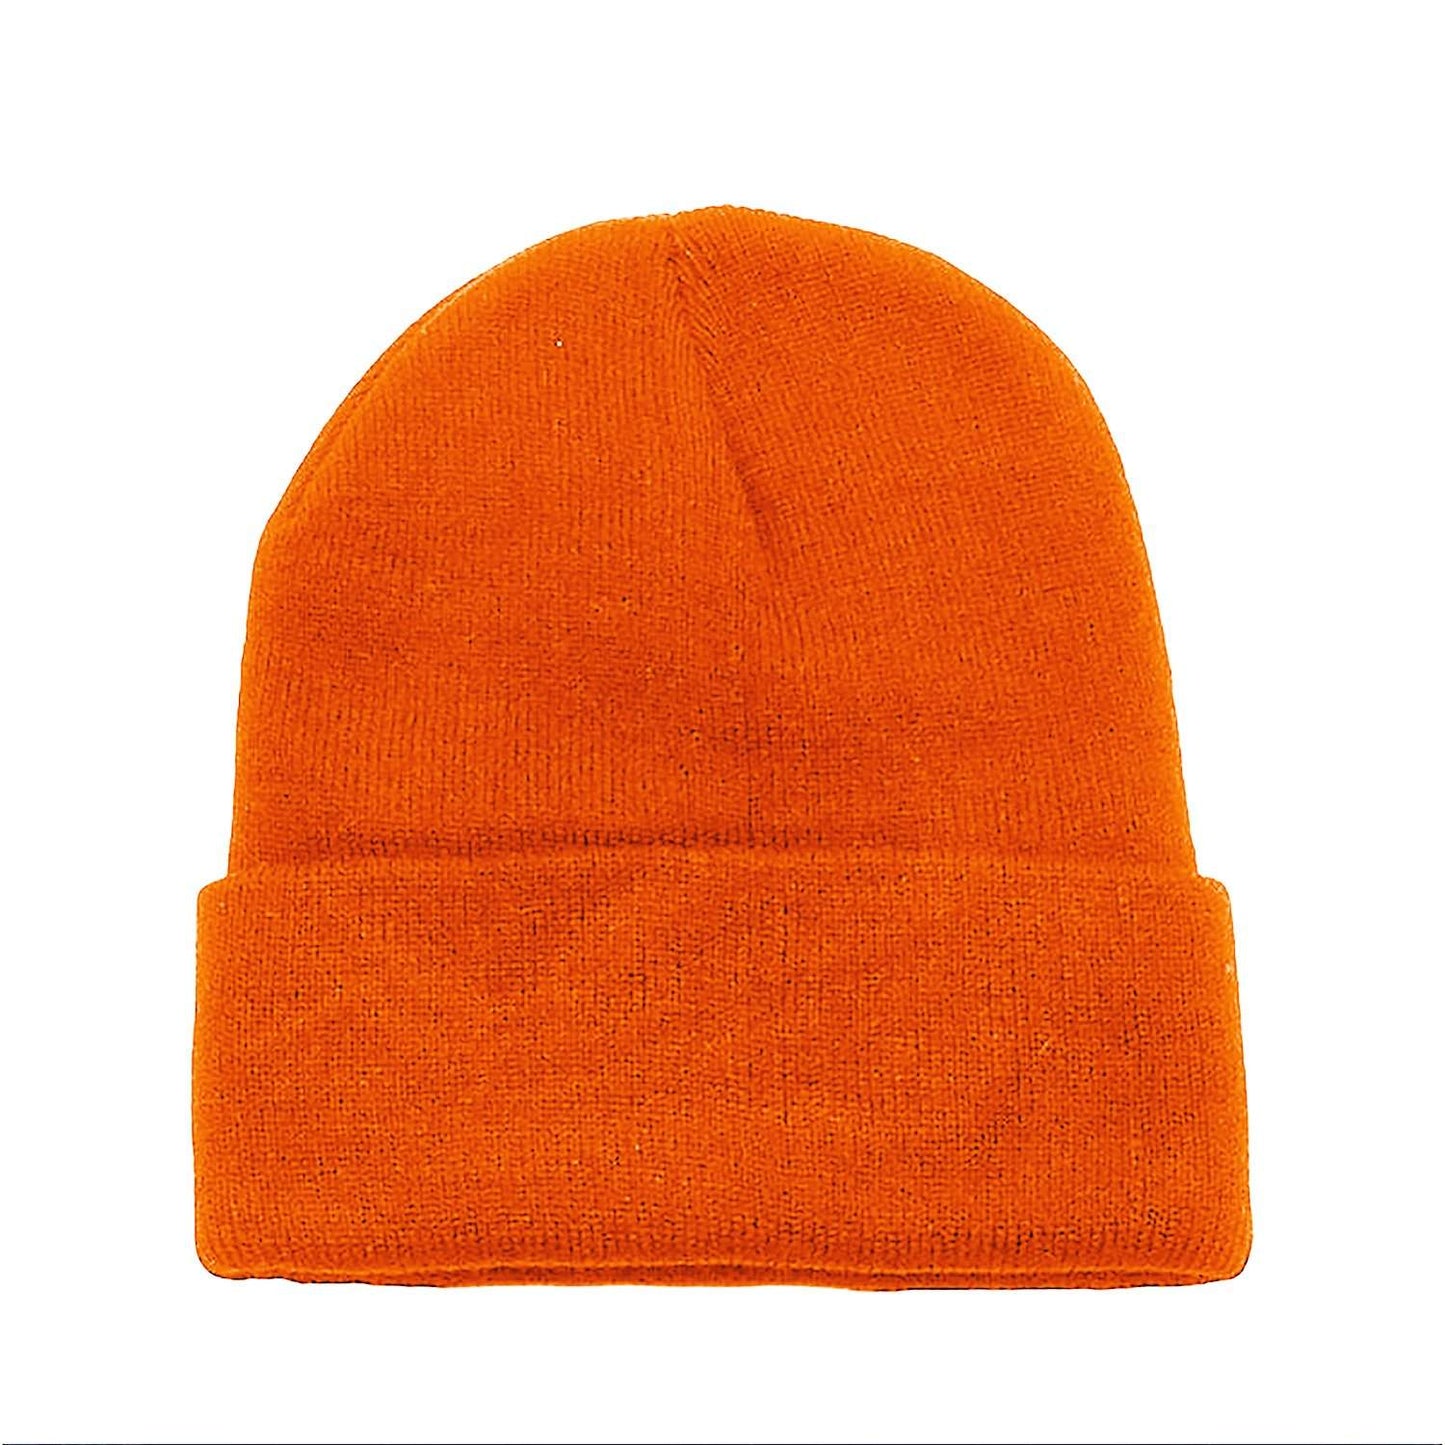 Solid Long Cuffed Beanie Skullies for Men and Women